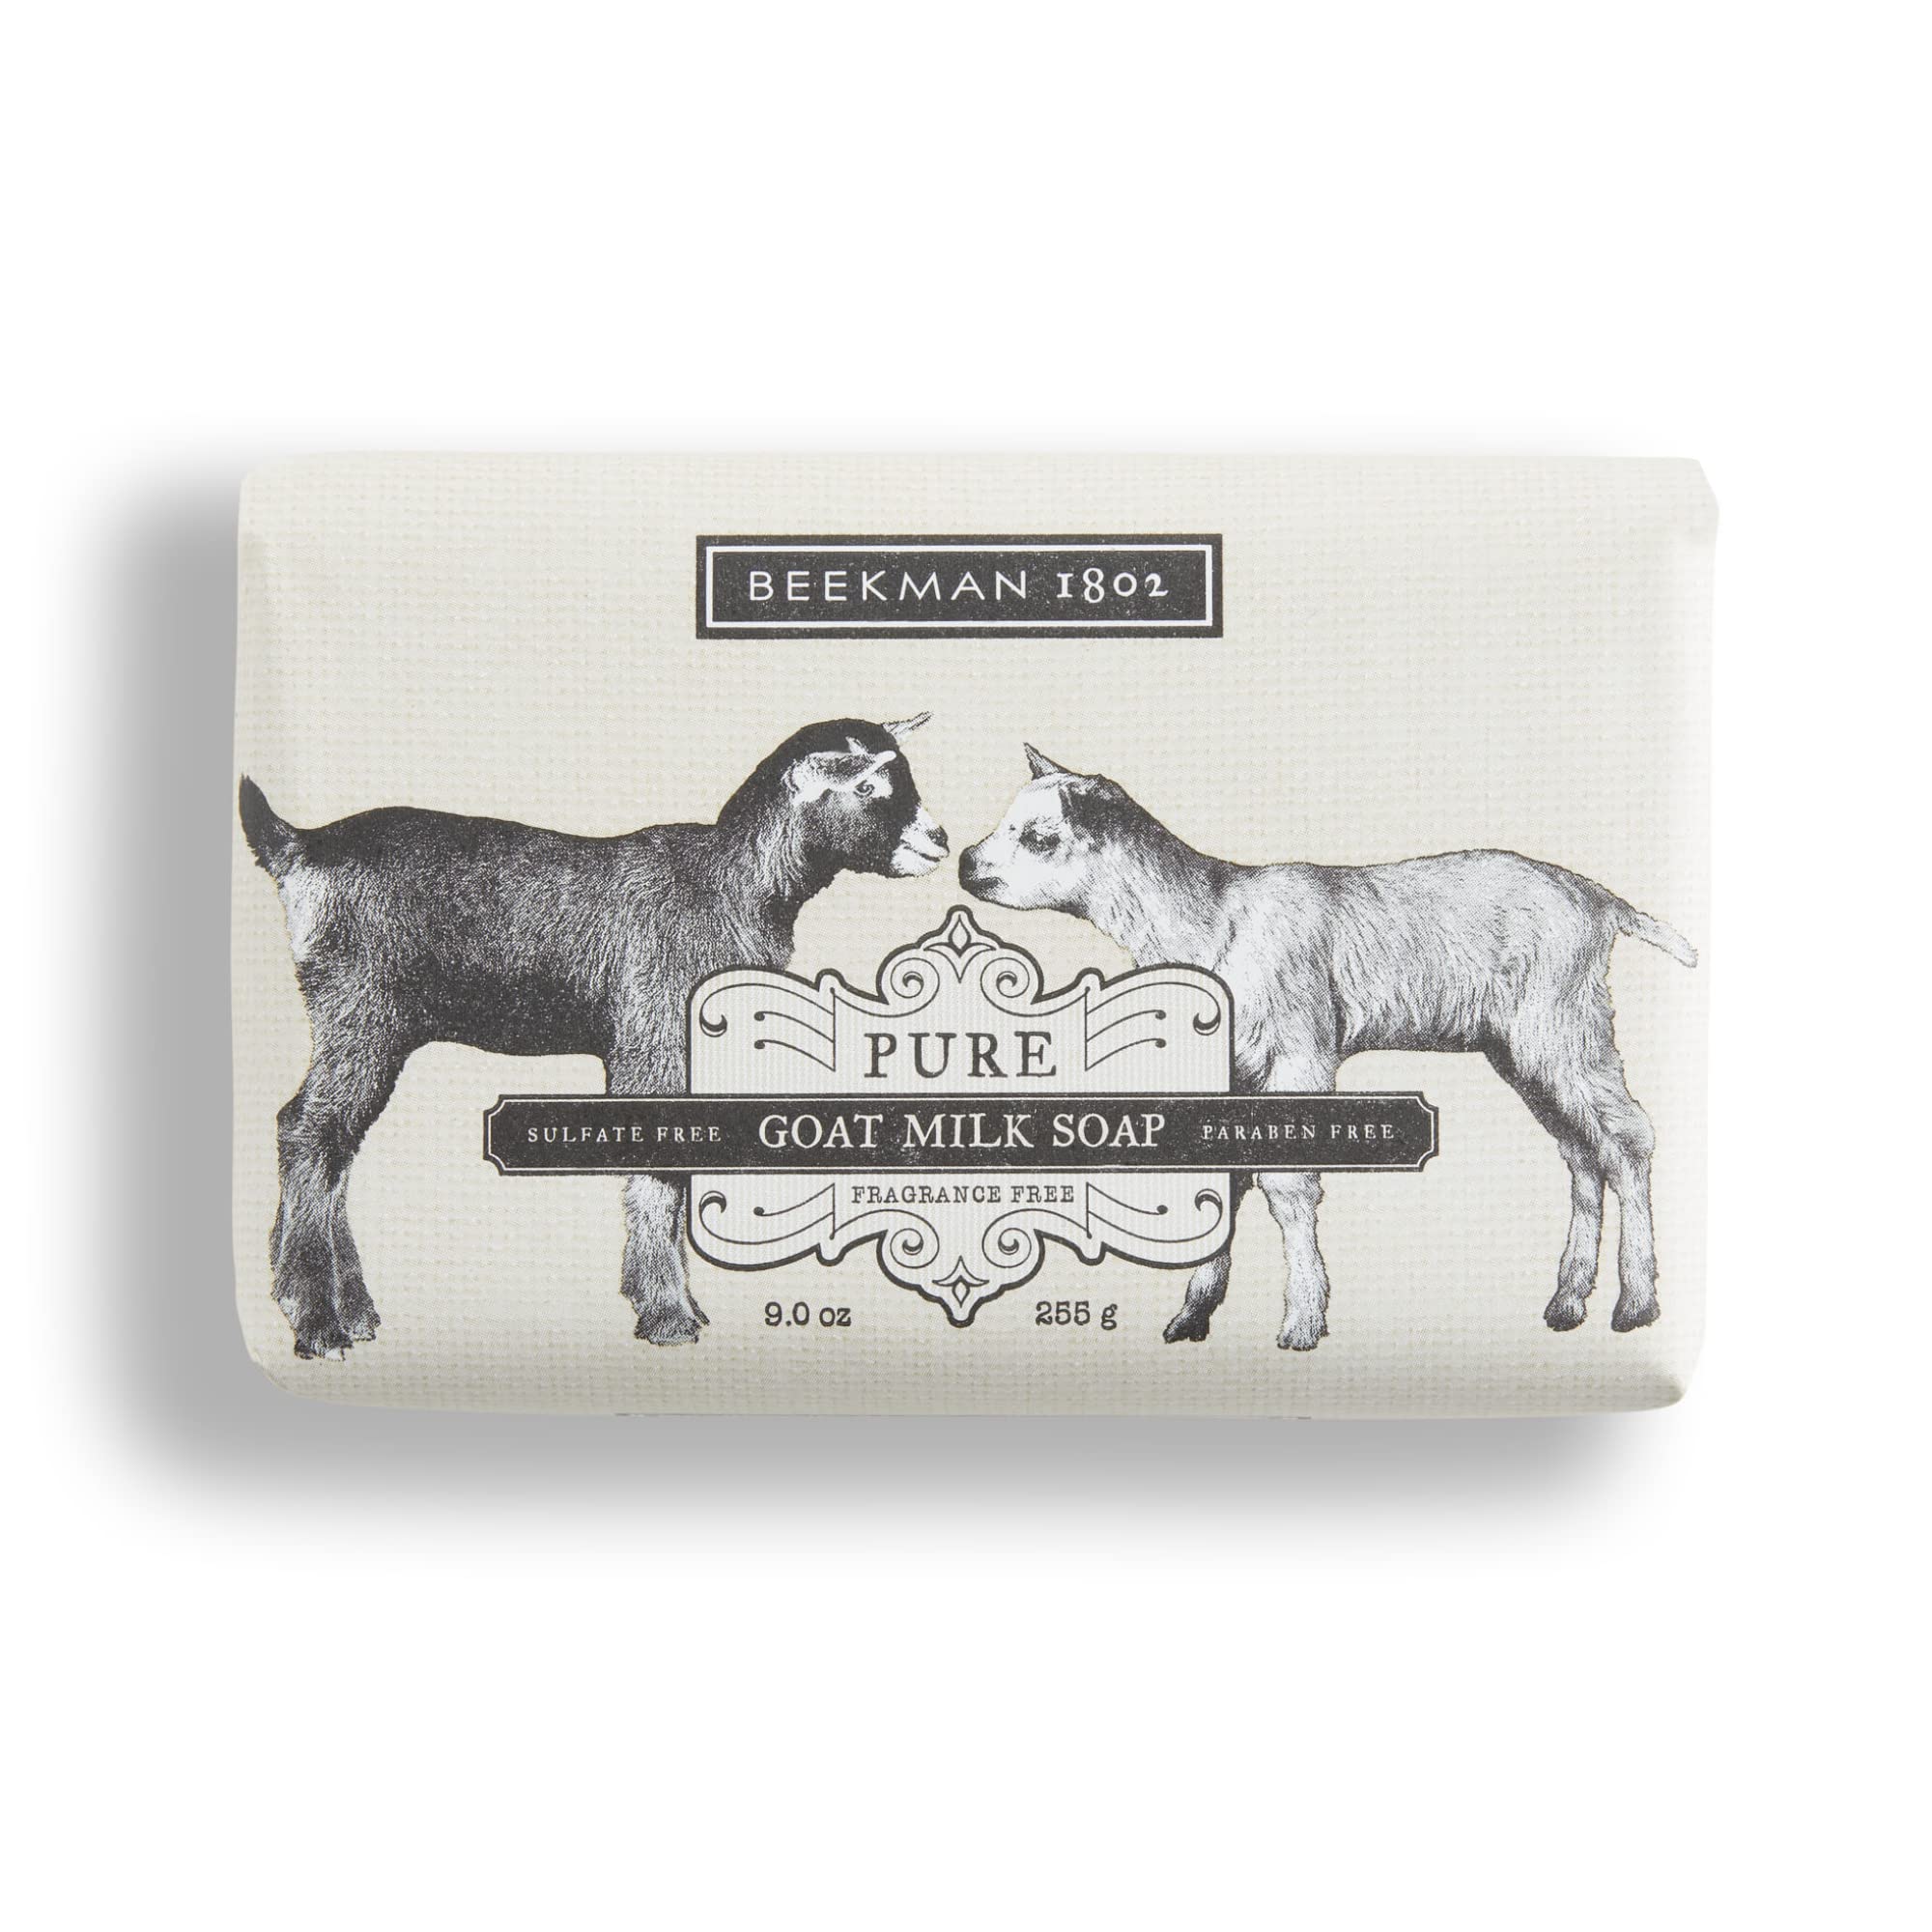 Beekman 1802 4-Piece Goat Milk Bars of Soap Auto-Delivery 